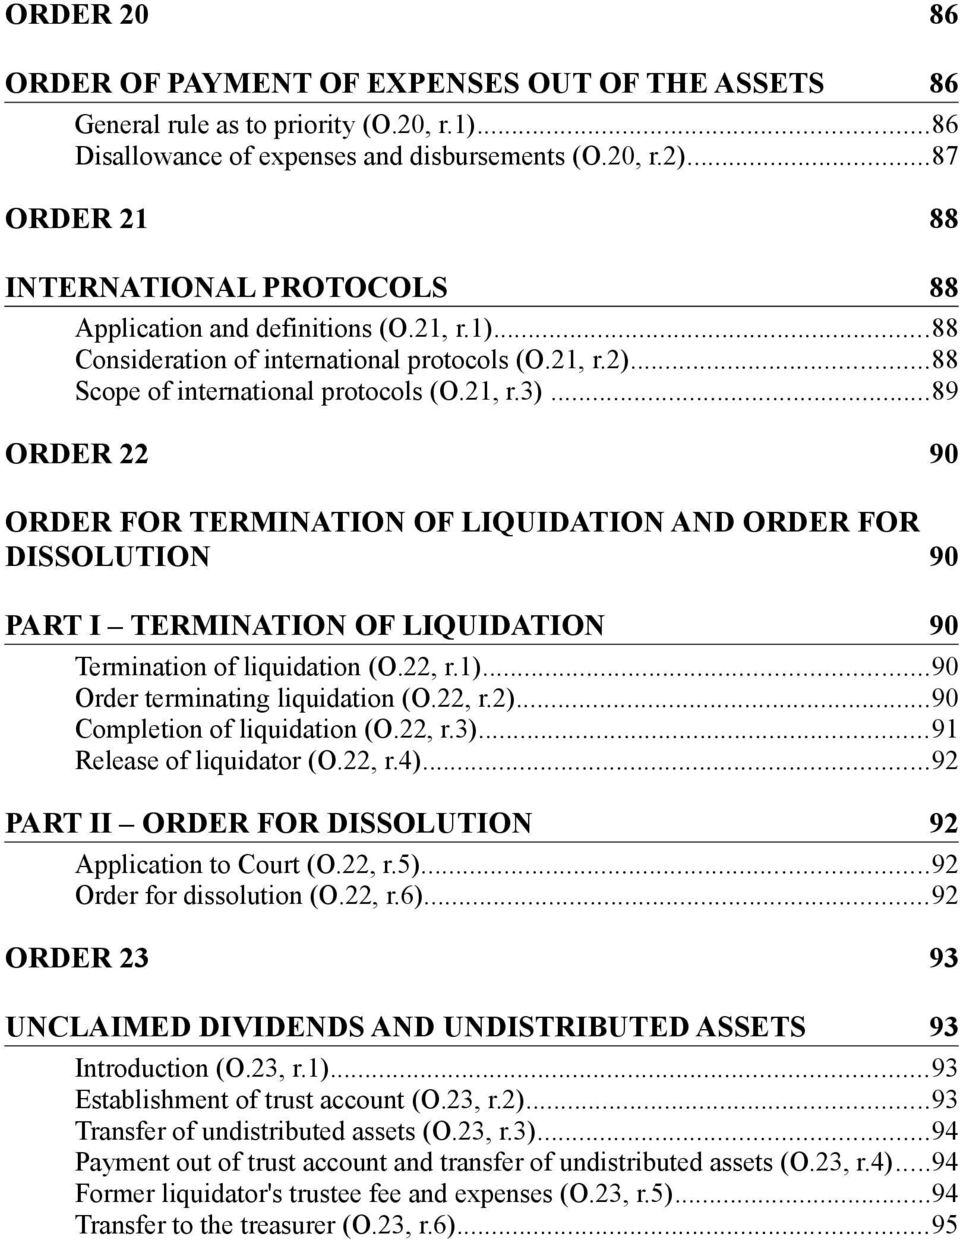 ..89 ORDER 22 90 ORDER FOR TERMINATION OF LIQUIDATION AND ORDER FOR DISSOLUTION 90 PART I TERMINATION OF LIQUIDATION 90 Termination of liquidation (O.22, r.1)...90 Order terminating liquidation (O.